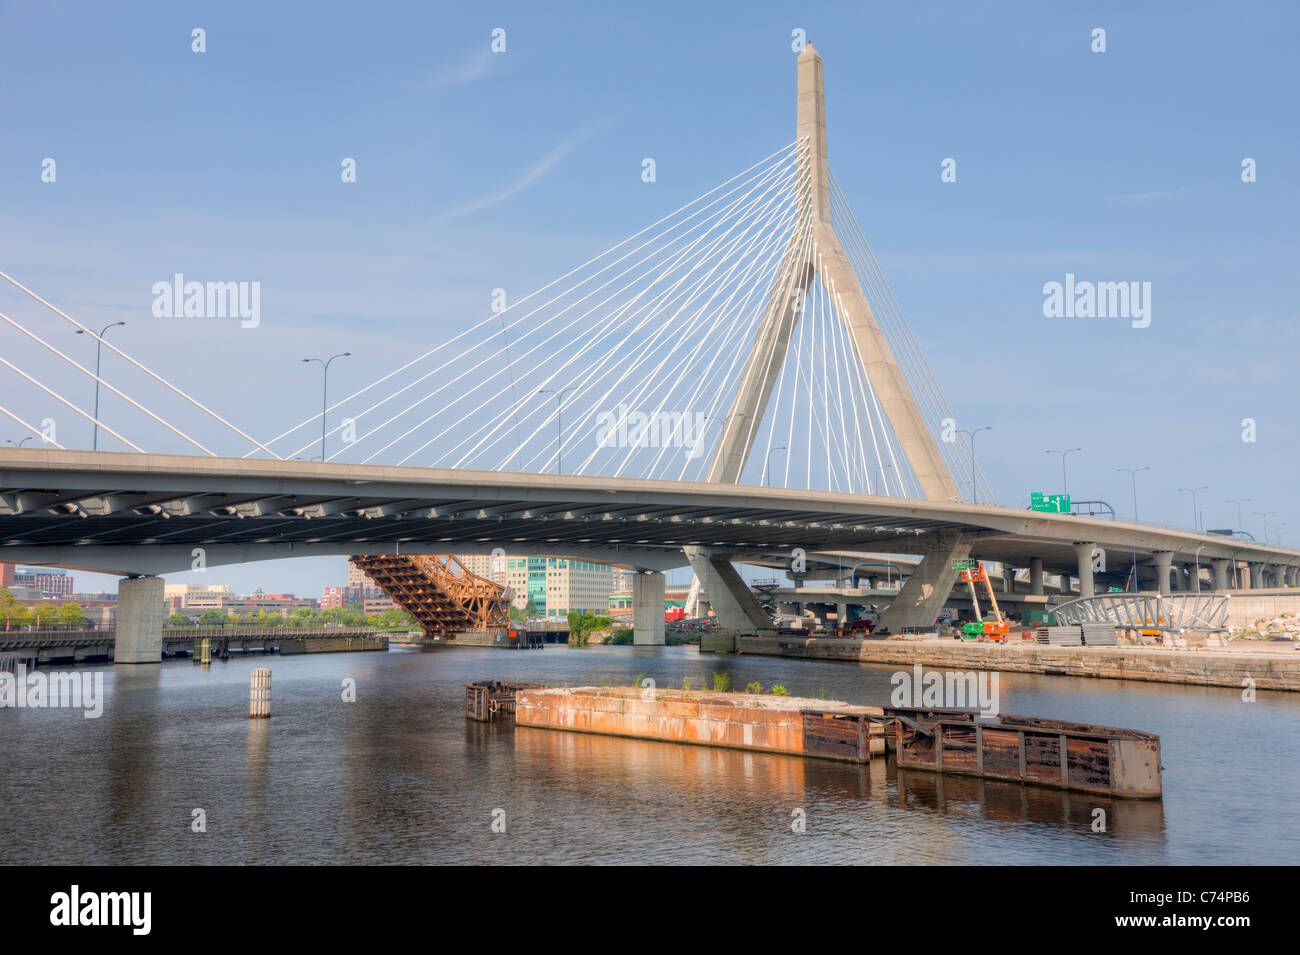 The Leonard P. Zakim Bunker Hill Memorial Bridge carries I-93 and US Route 1 over the Charles River in Boston, MA. Stock Photo